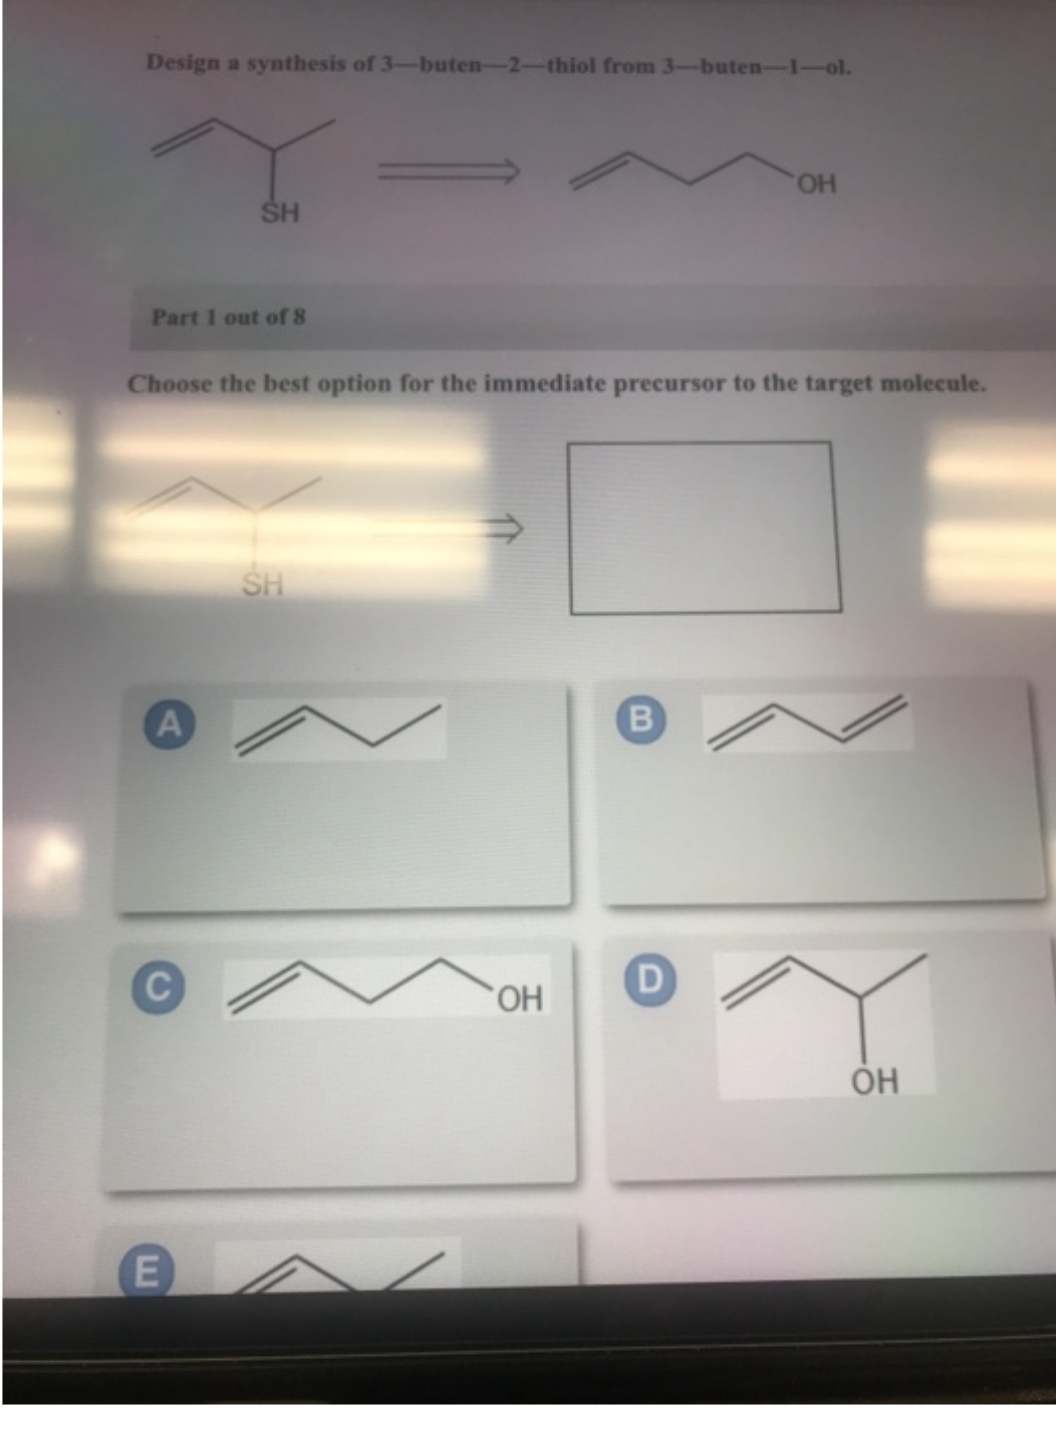 Design a synthesis of 3-buten-2-thiol from 3-buten-1-ol.
Part 1 out of 8
SH
A
Choose the best option for the immediate precursor to the target molecule.
E
SH
OH
B
OH
D
ОН